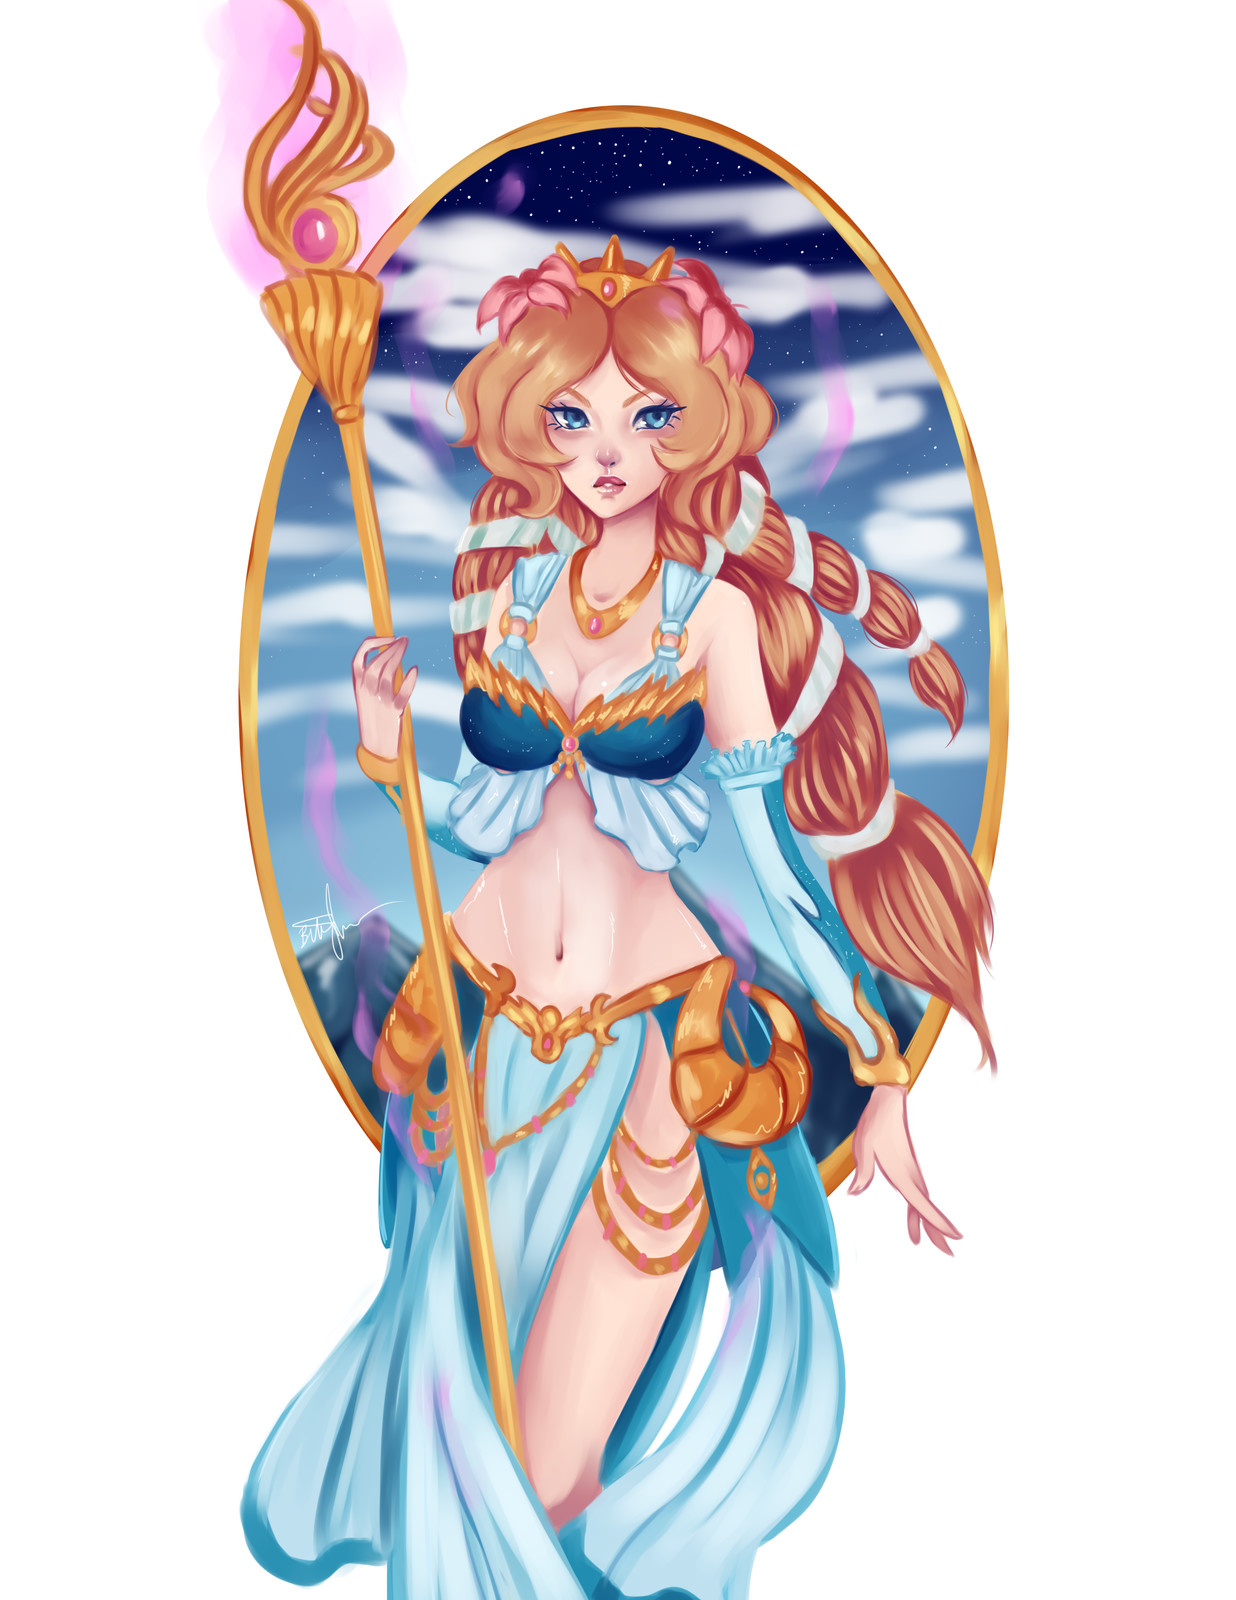 Aphrodite fanart, from Smite. 

completion